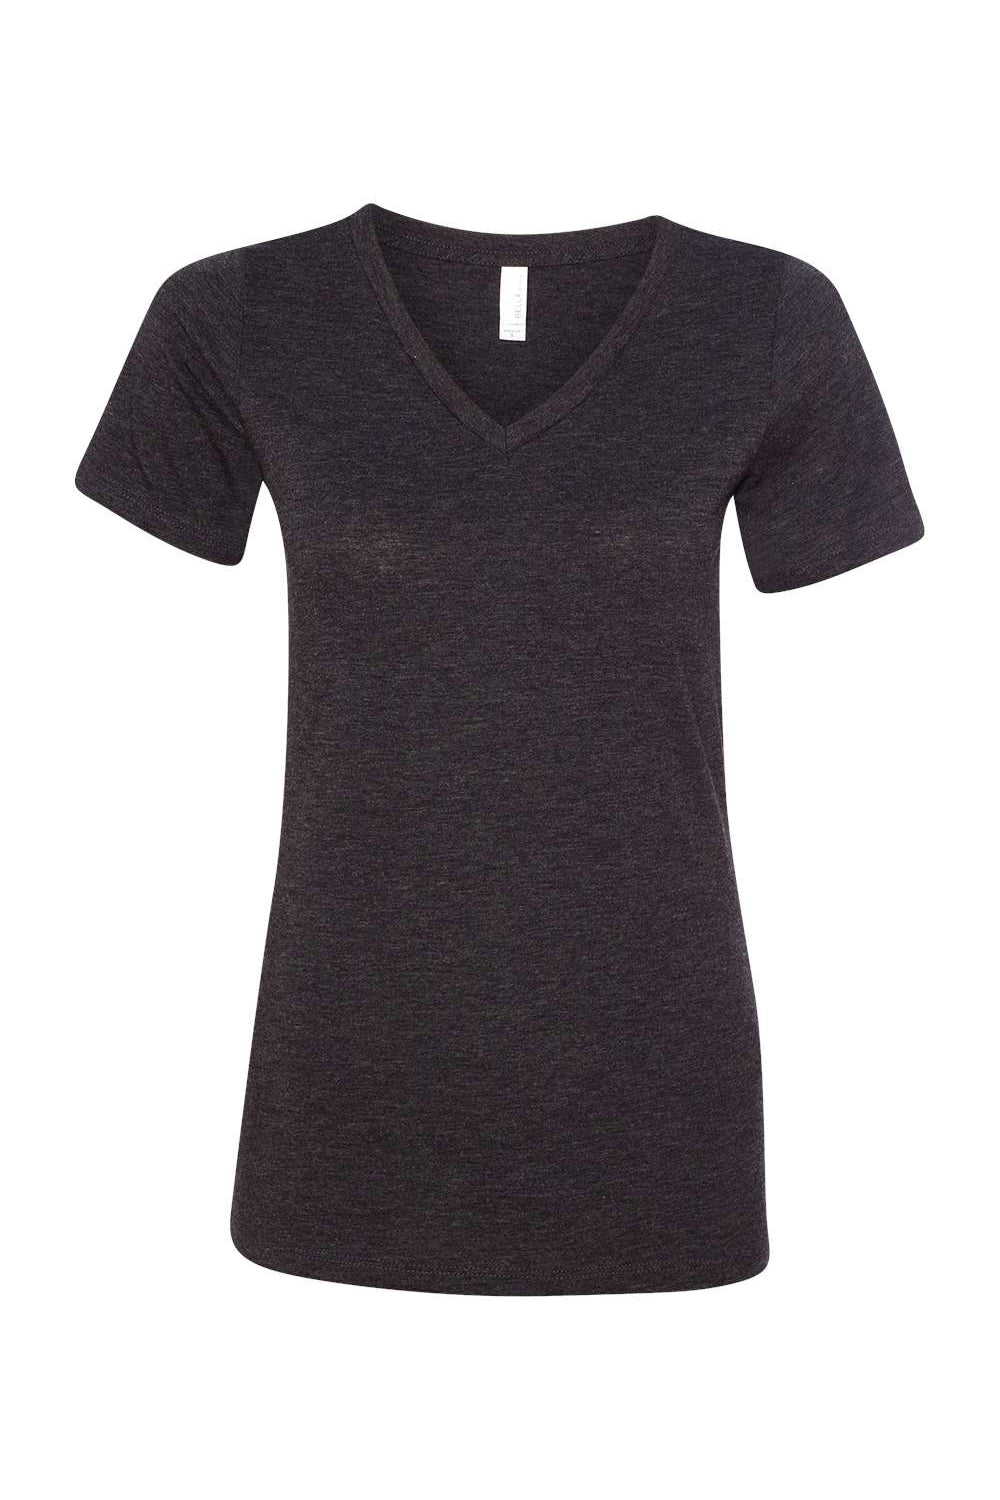 Bella + Canvas BC6415 Womens Relaxed Jersey Short Sleeve V-Neck T-Shirt Charcoal Black Triblend Flat Front